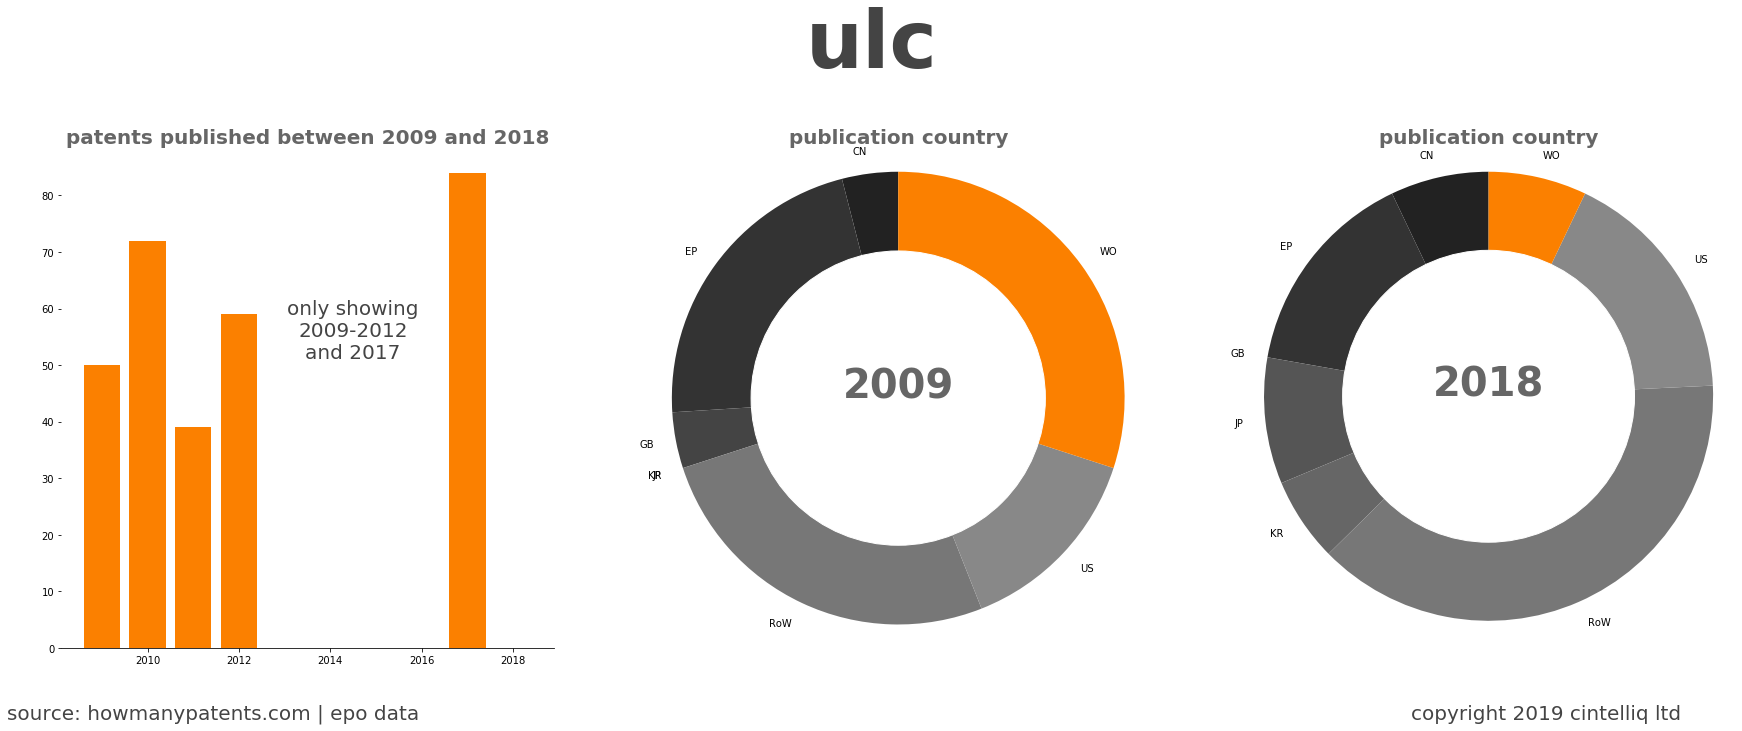 summary of patents for Ulc